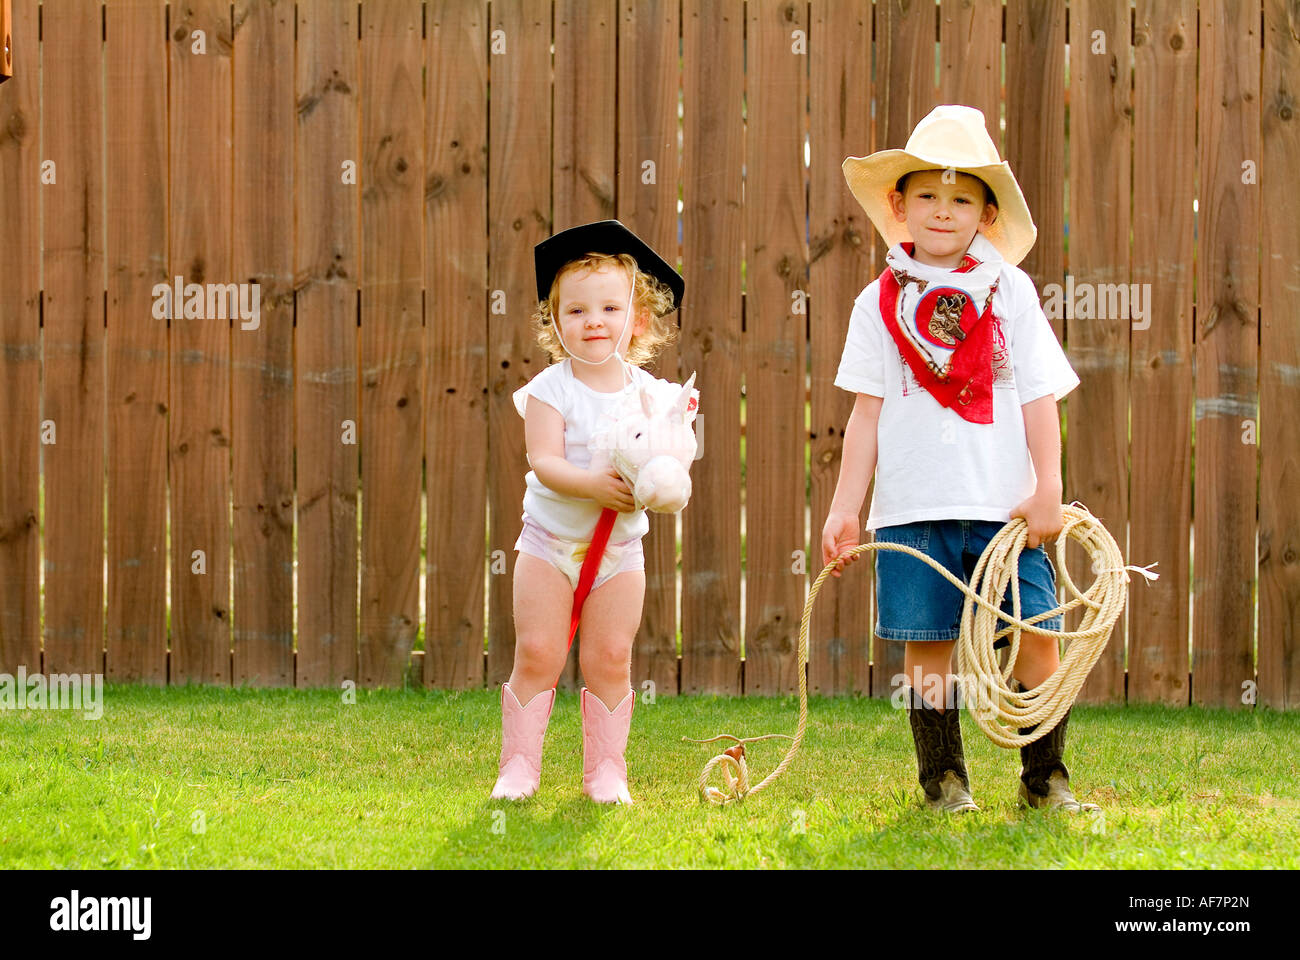 5 year old  2 year old in the backyard dressed up like pseudo cowfolks Stock Photo